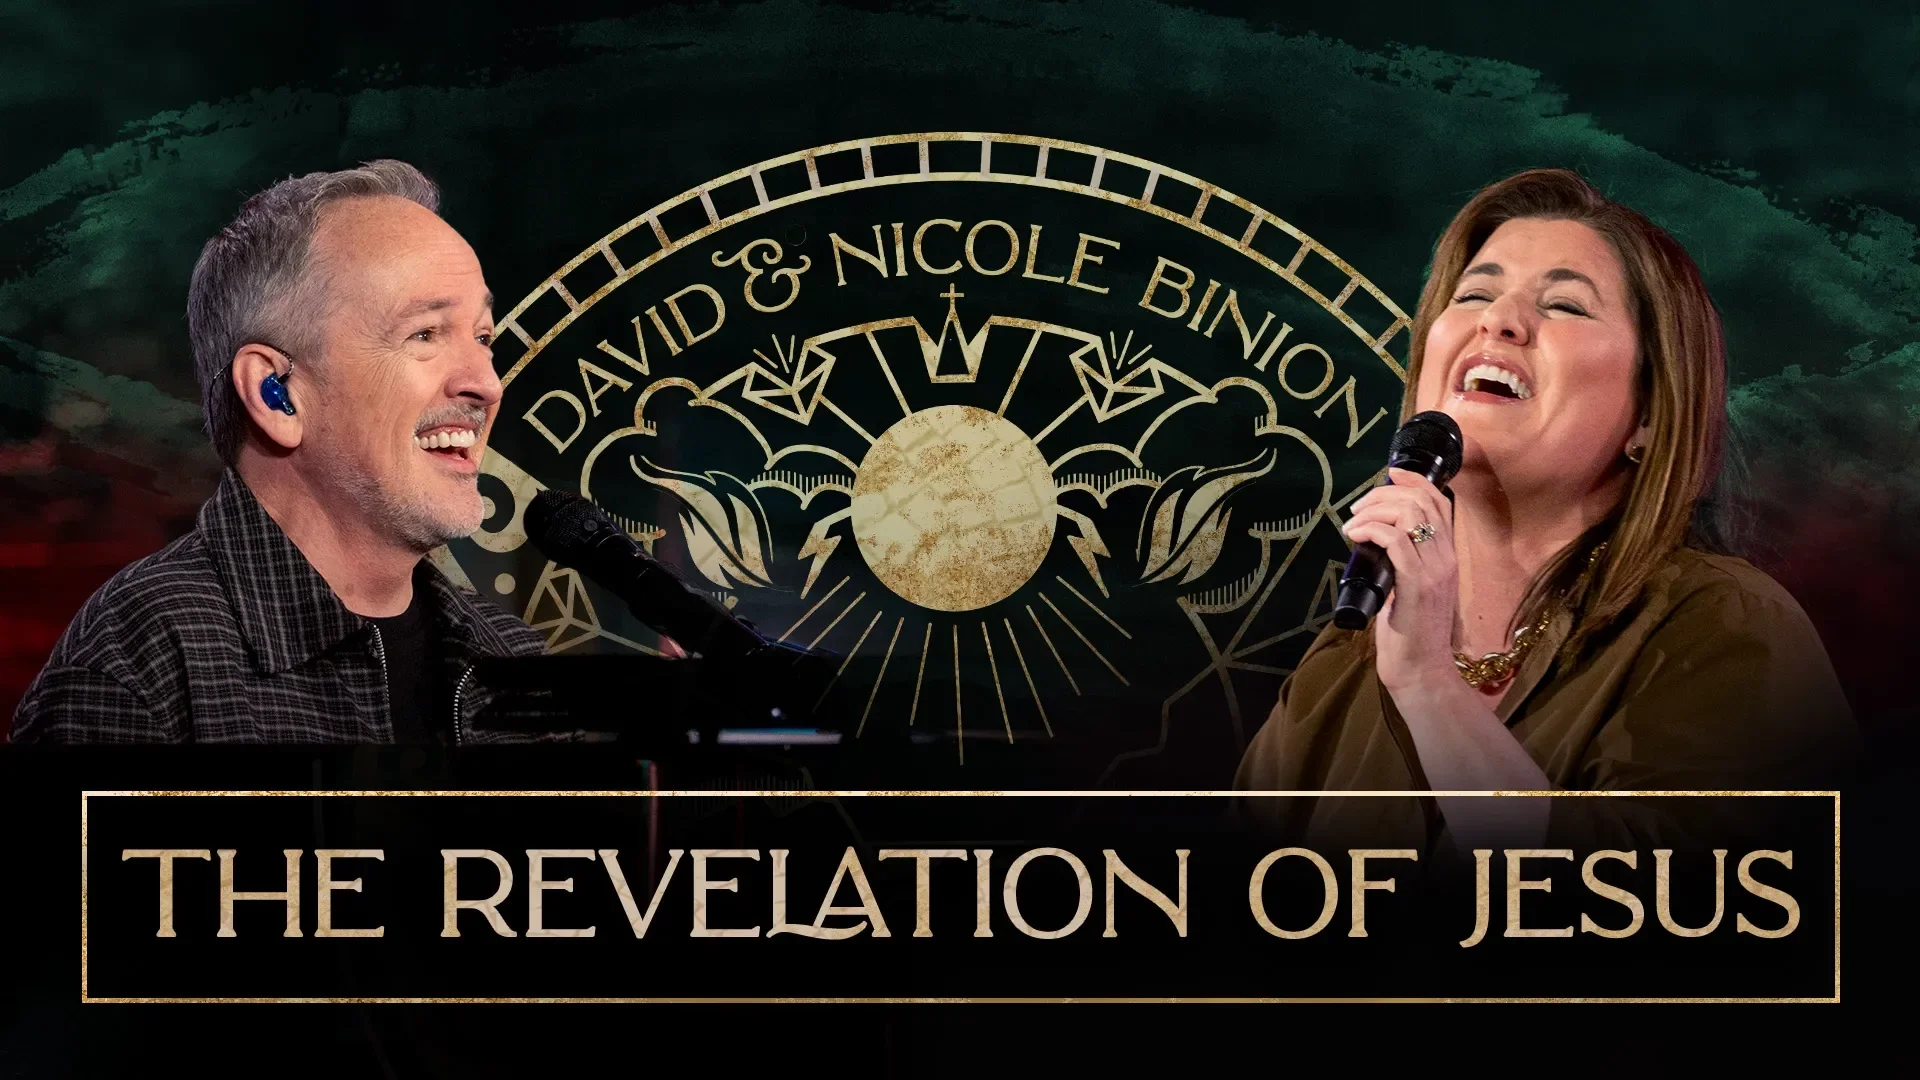 The Revelation of Jesus Concert with David and Nicole Binion 